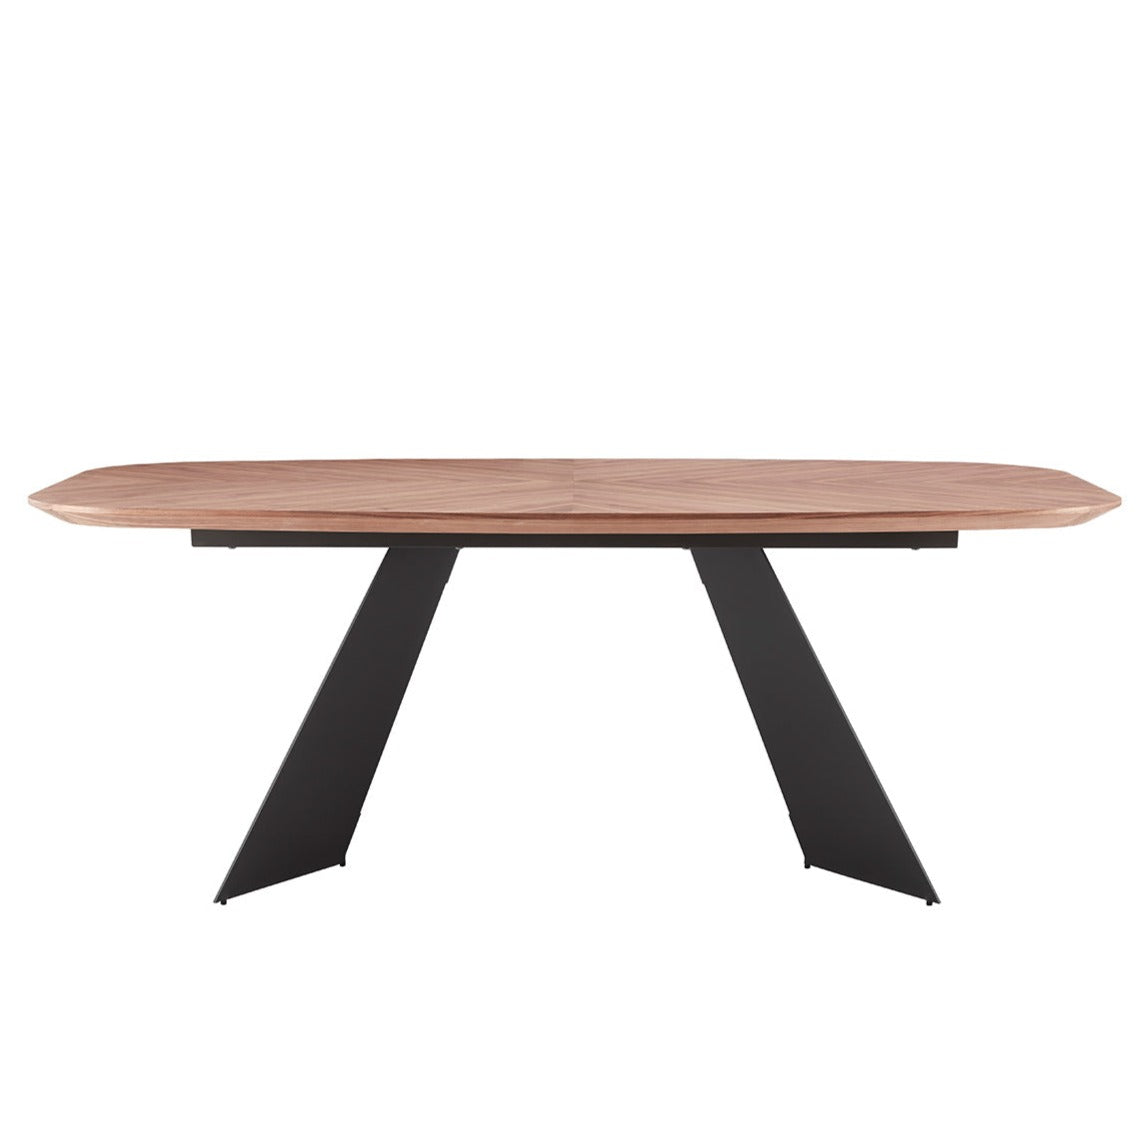 Malene 79" Dining Table - What A Room